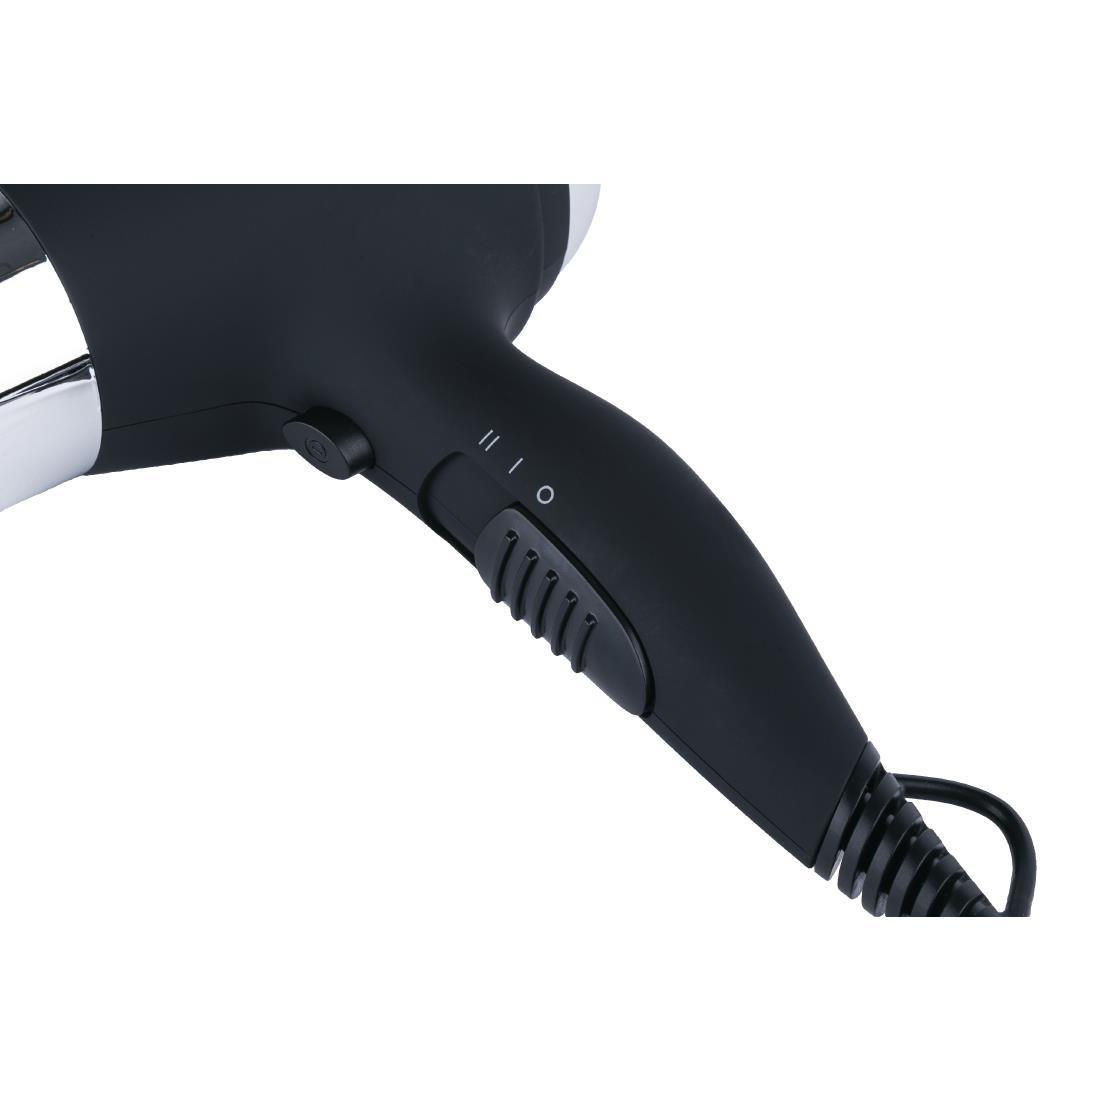 Deluxe Black and Chrome Hairdryer 1800W - CG077  - 2